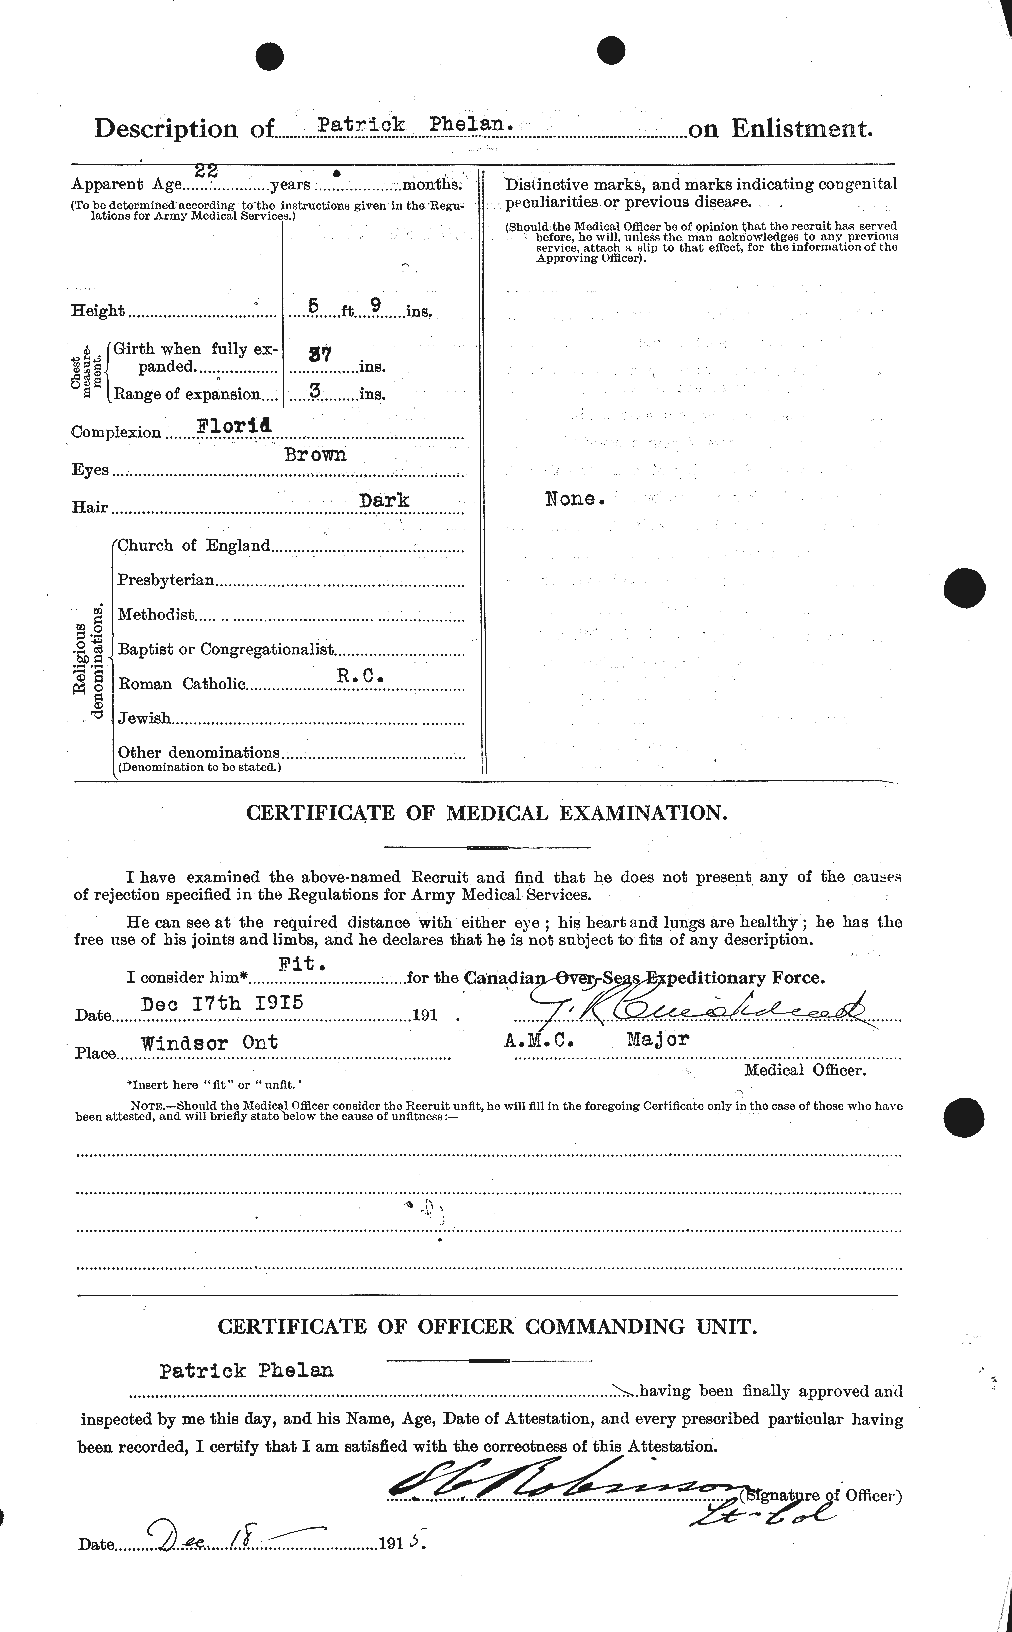 Personnel Records of the First World War - CEF 576962b